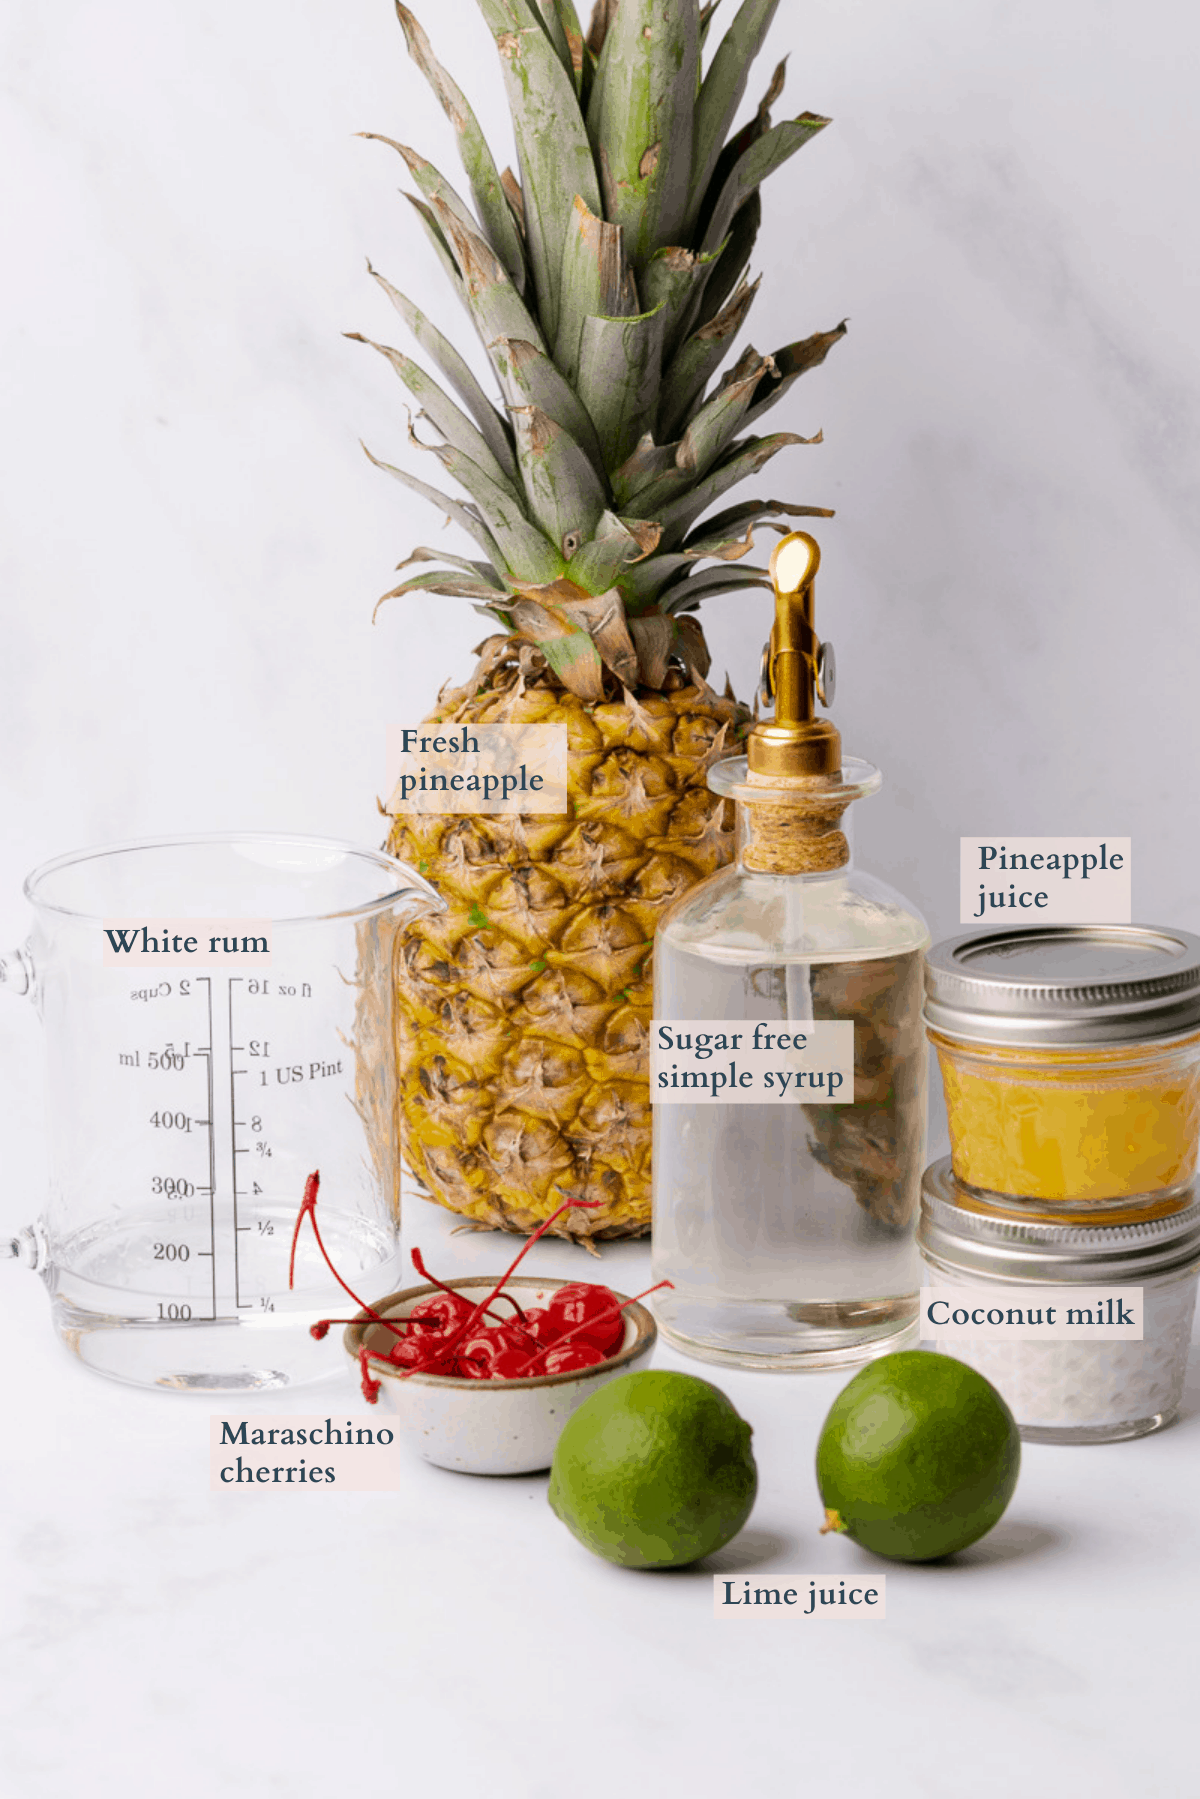 keto pina colada ingredients graphic with text to denote each ingredient